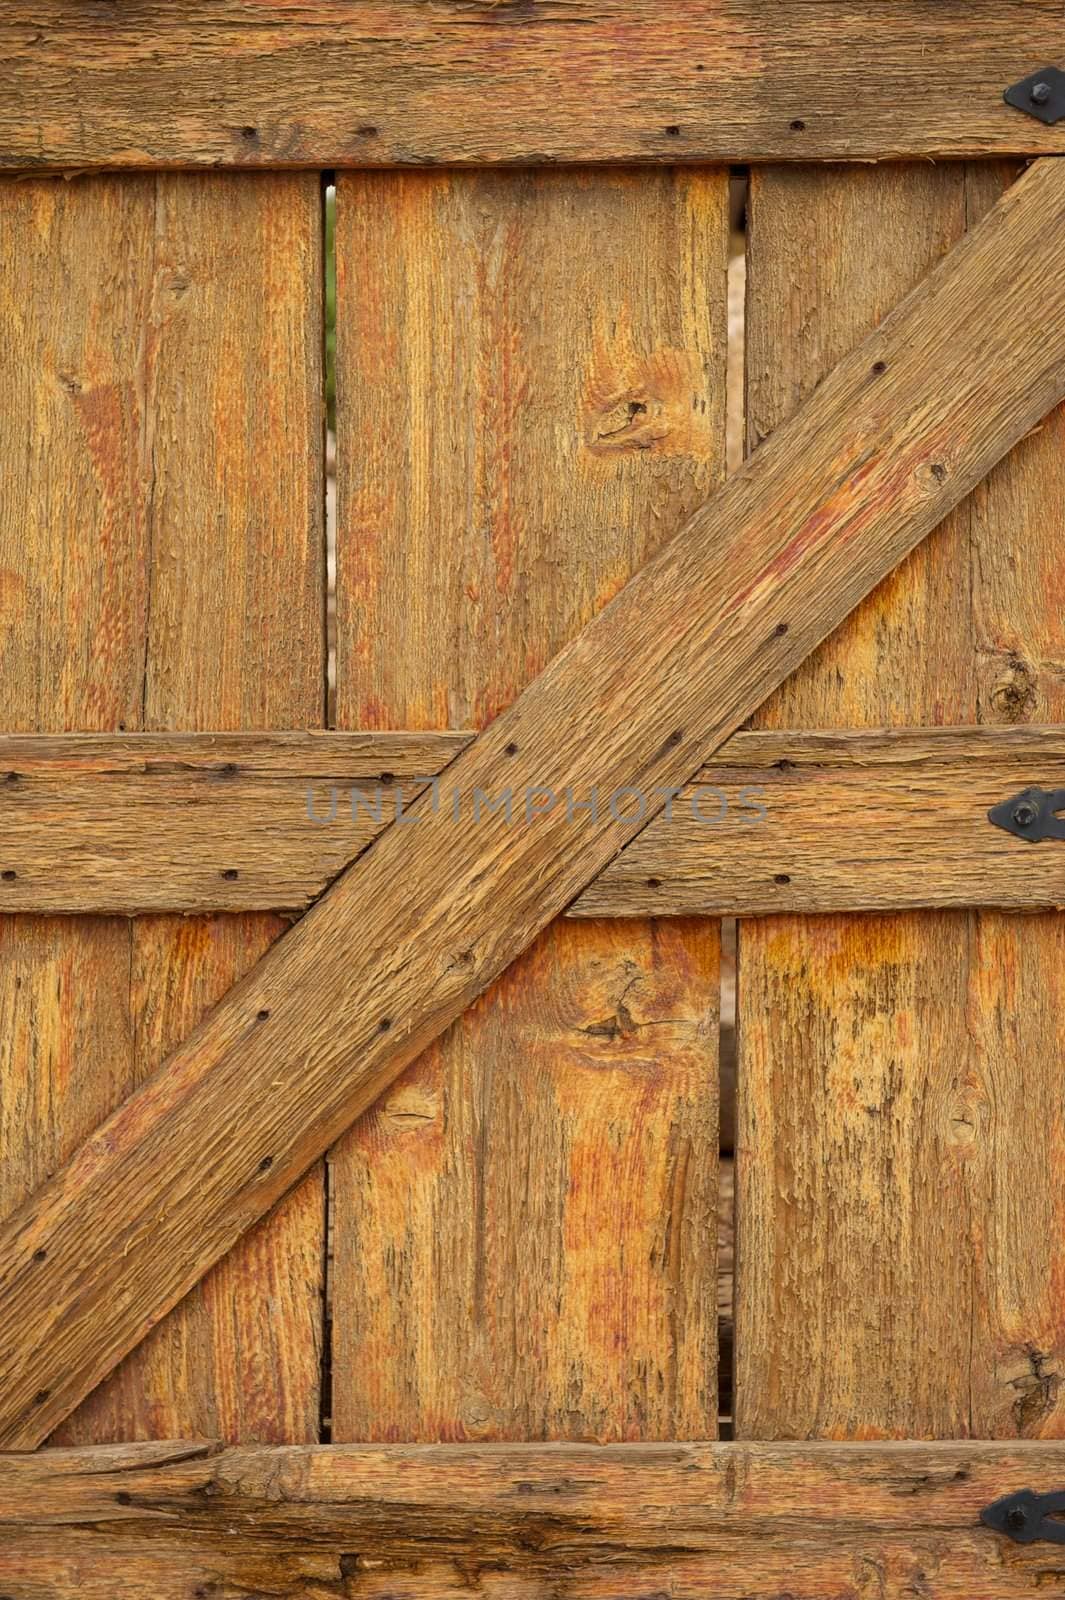 Aged and Worn Wooden Gate by pixelsnap